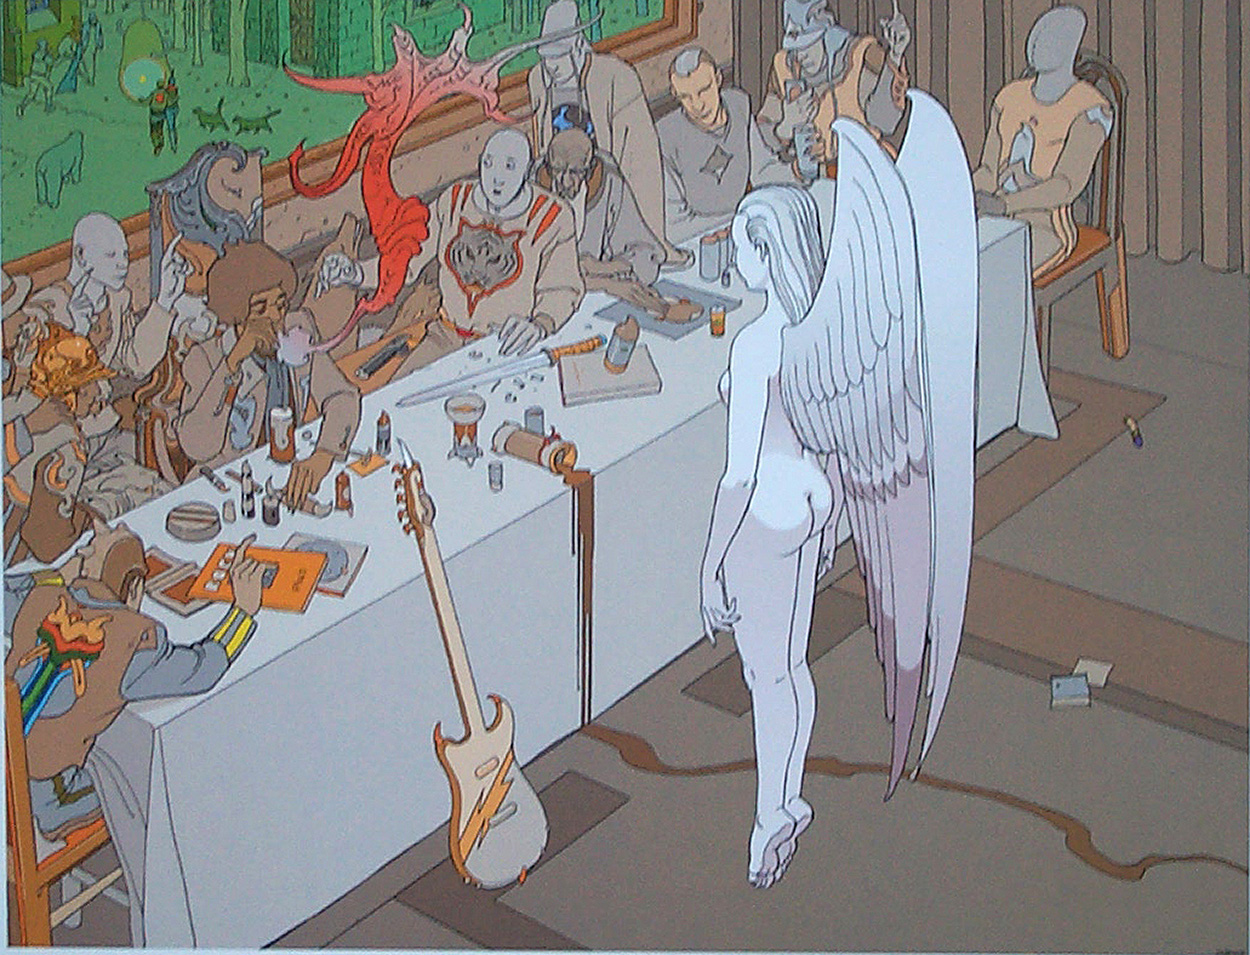 Hendrix - The Last Supper (Limited Edition Print) art by Moebius (Jean Giraud) Art at The Illustration Art Gallery